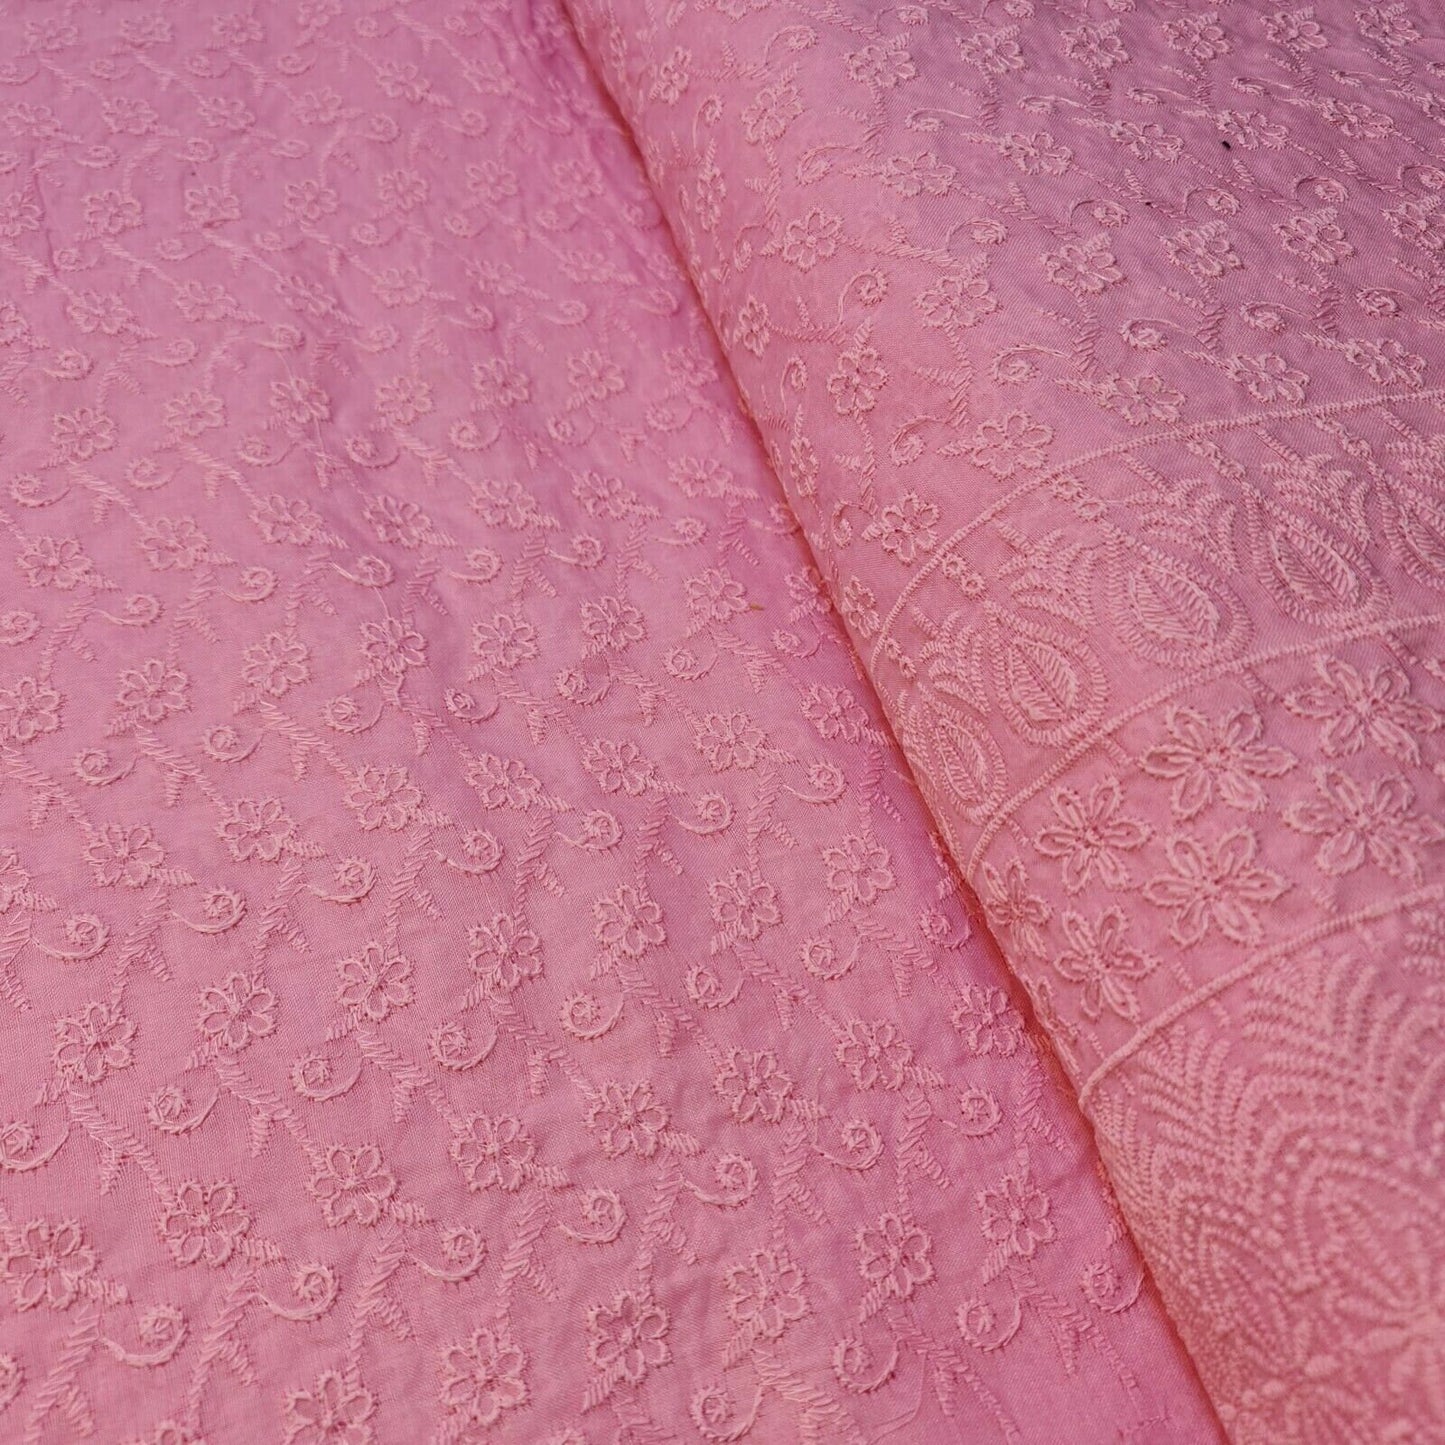 NEW SPRING 100% Cotton Lawn Broderie Anglaise Embroidery Dress Craft Fabric 44" (Pink)